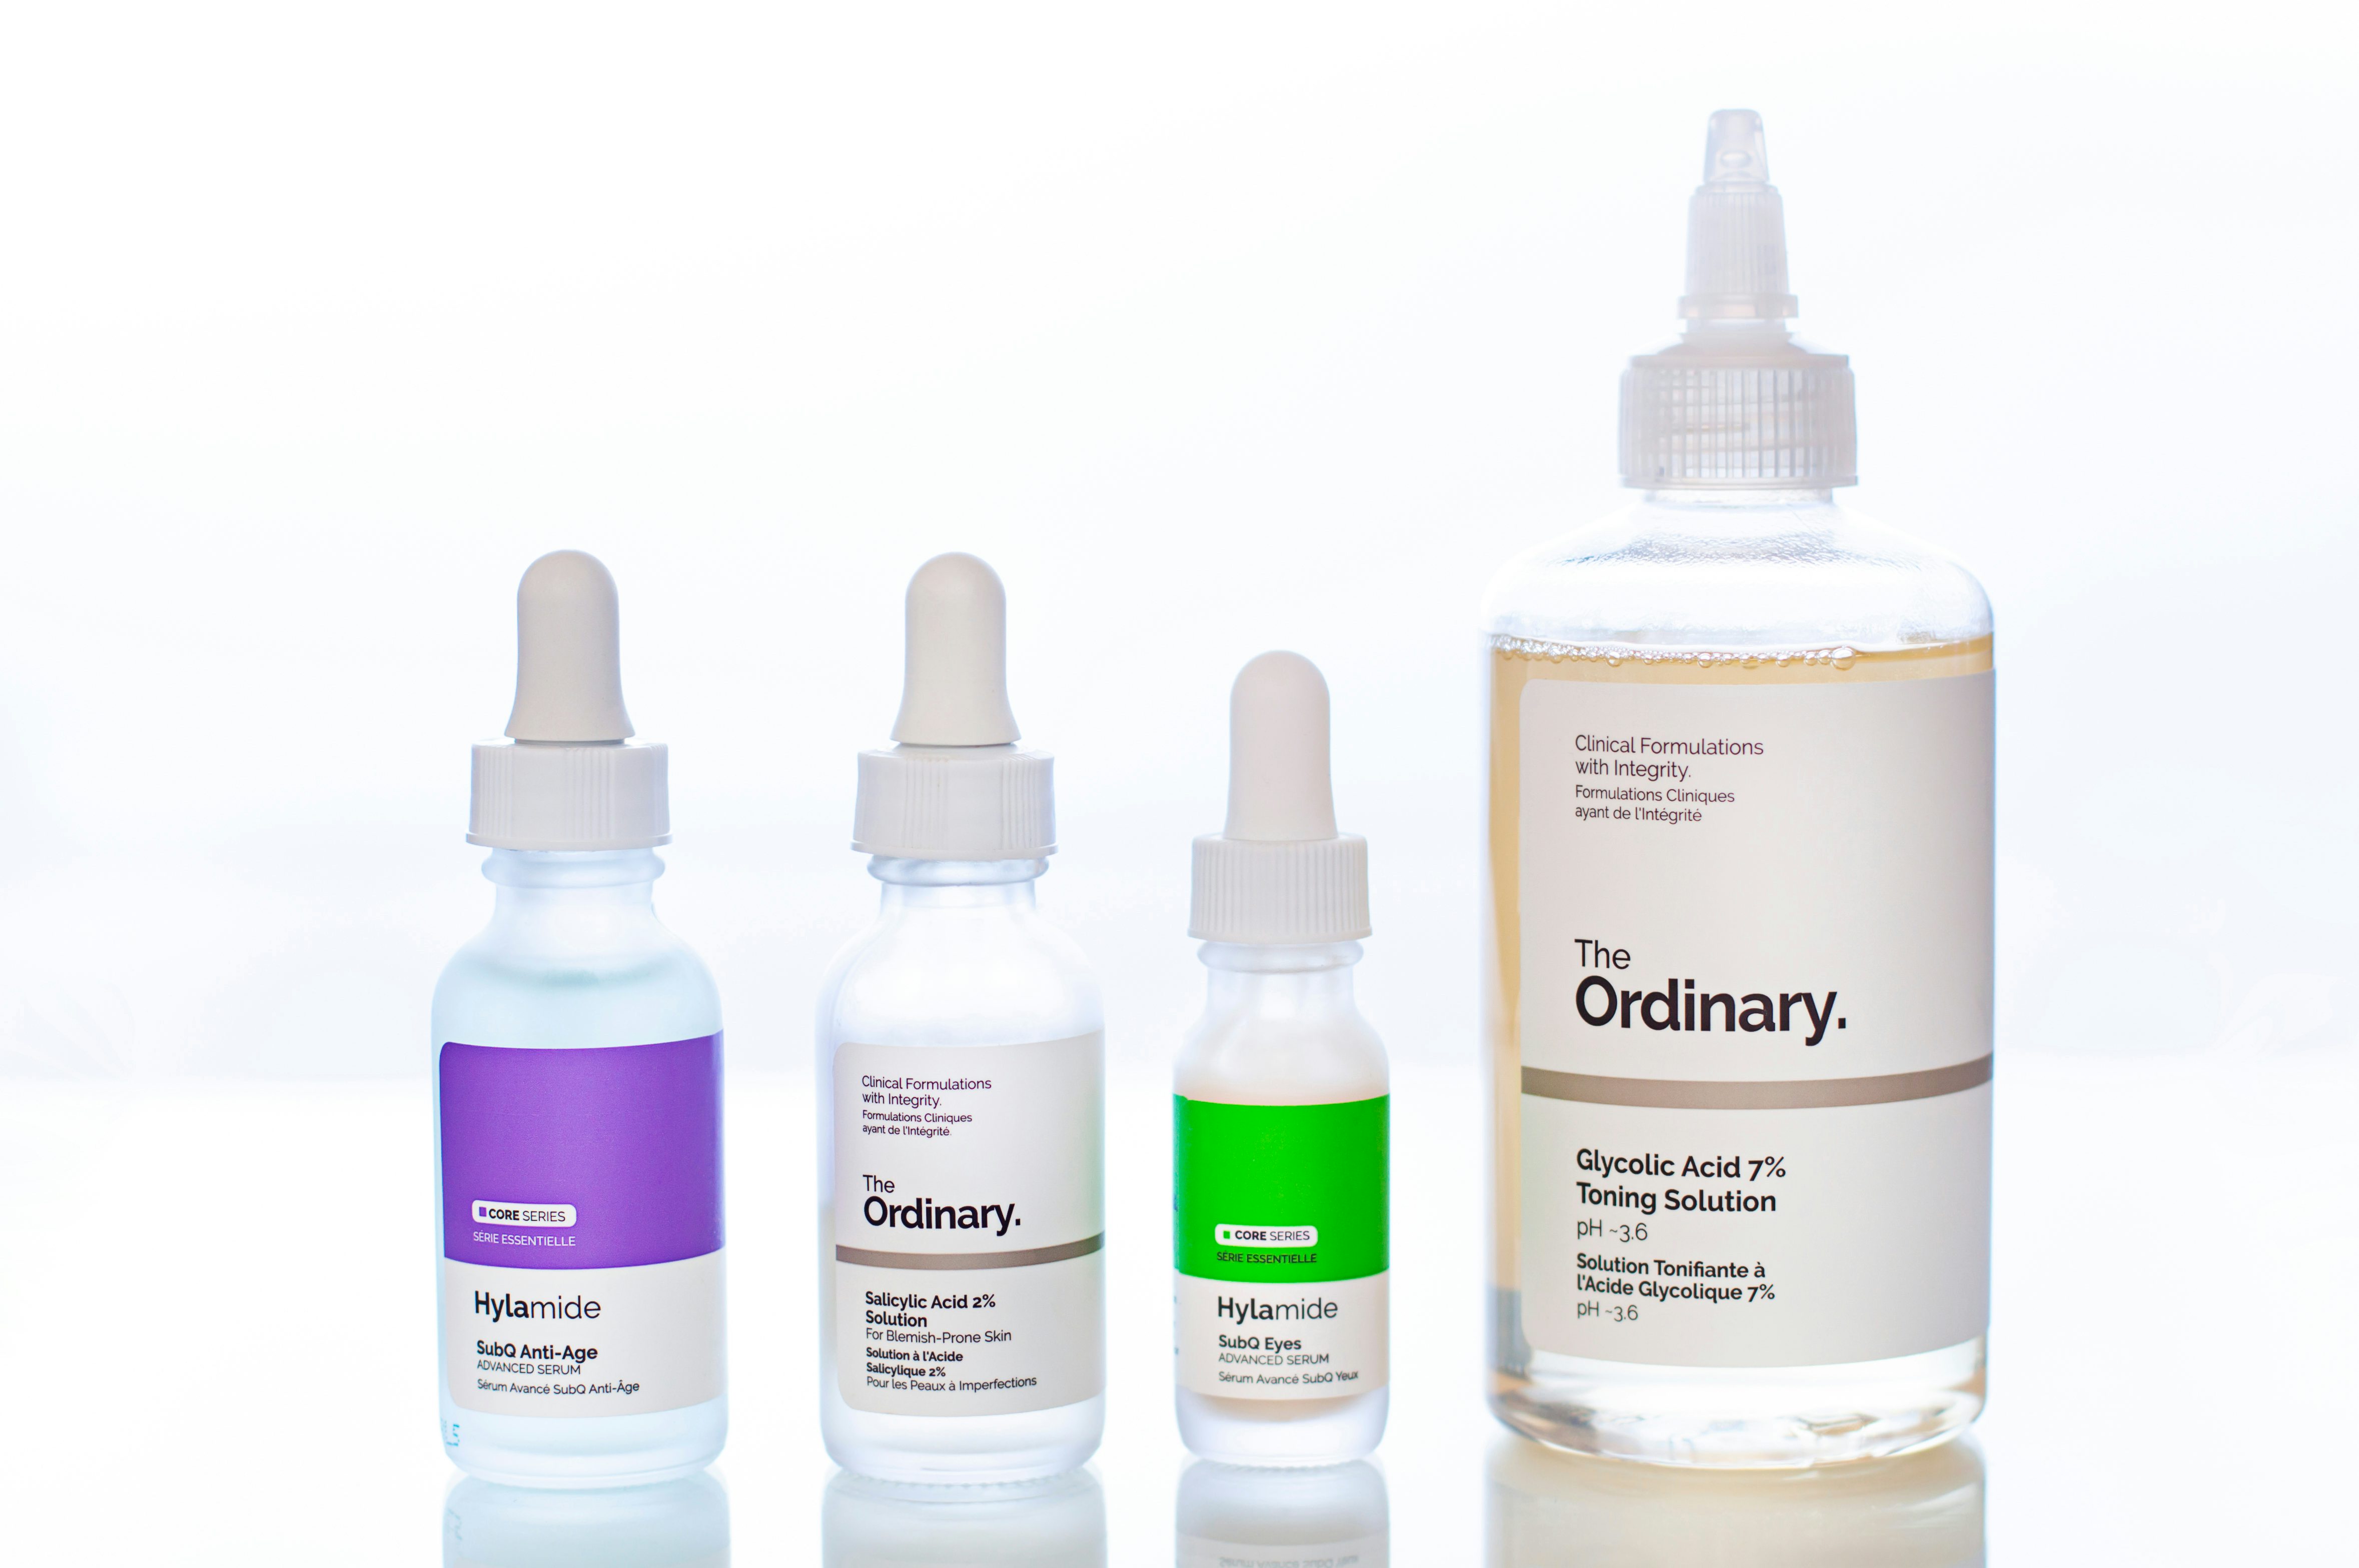 Products by Deciem brands The Ordinary and Hylamide. Shutterstock.